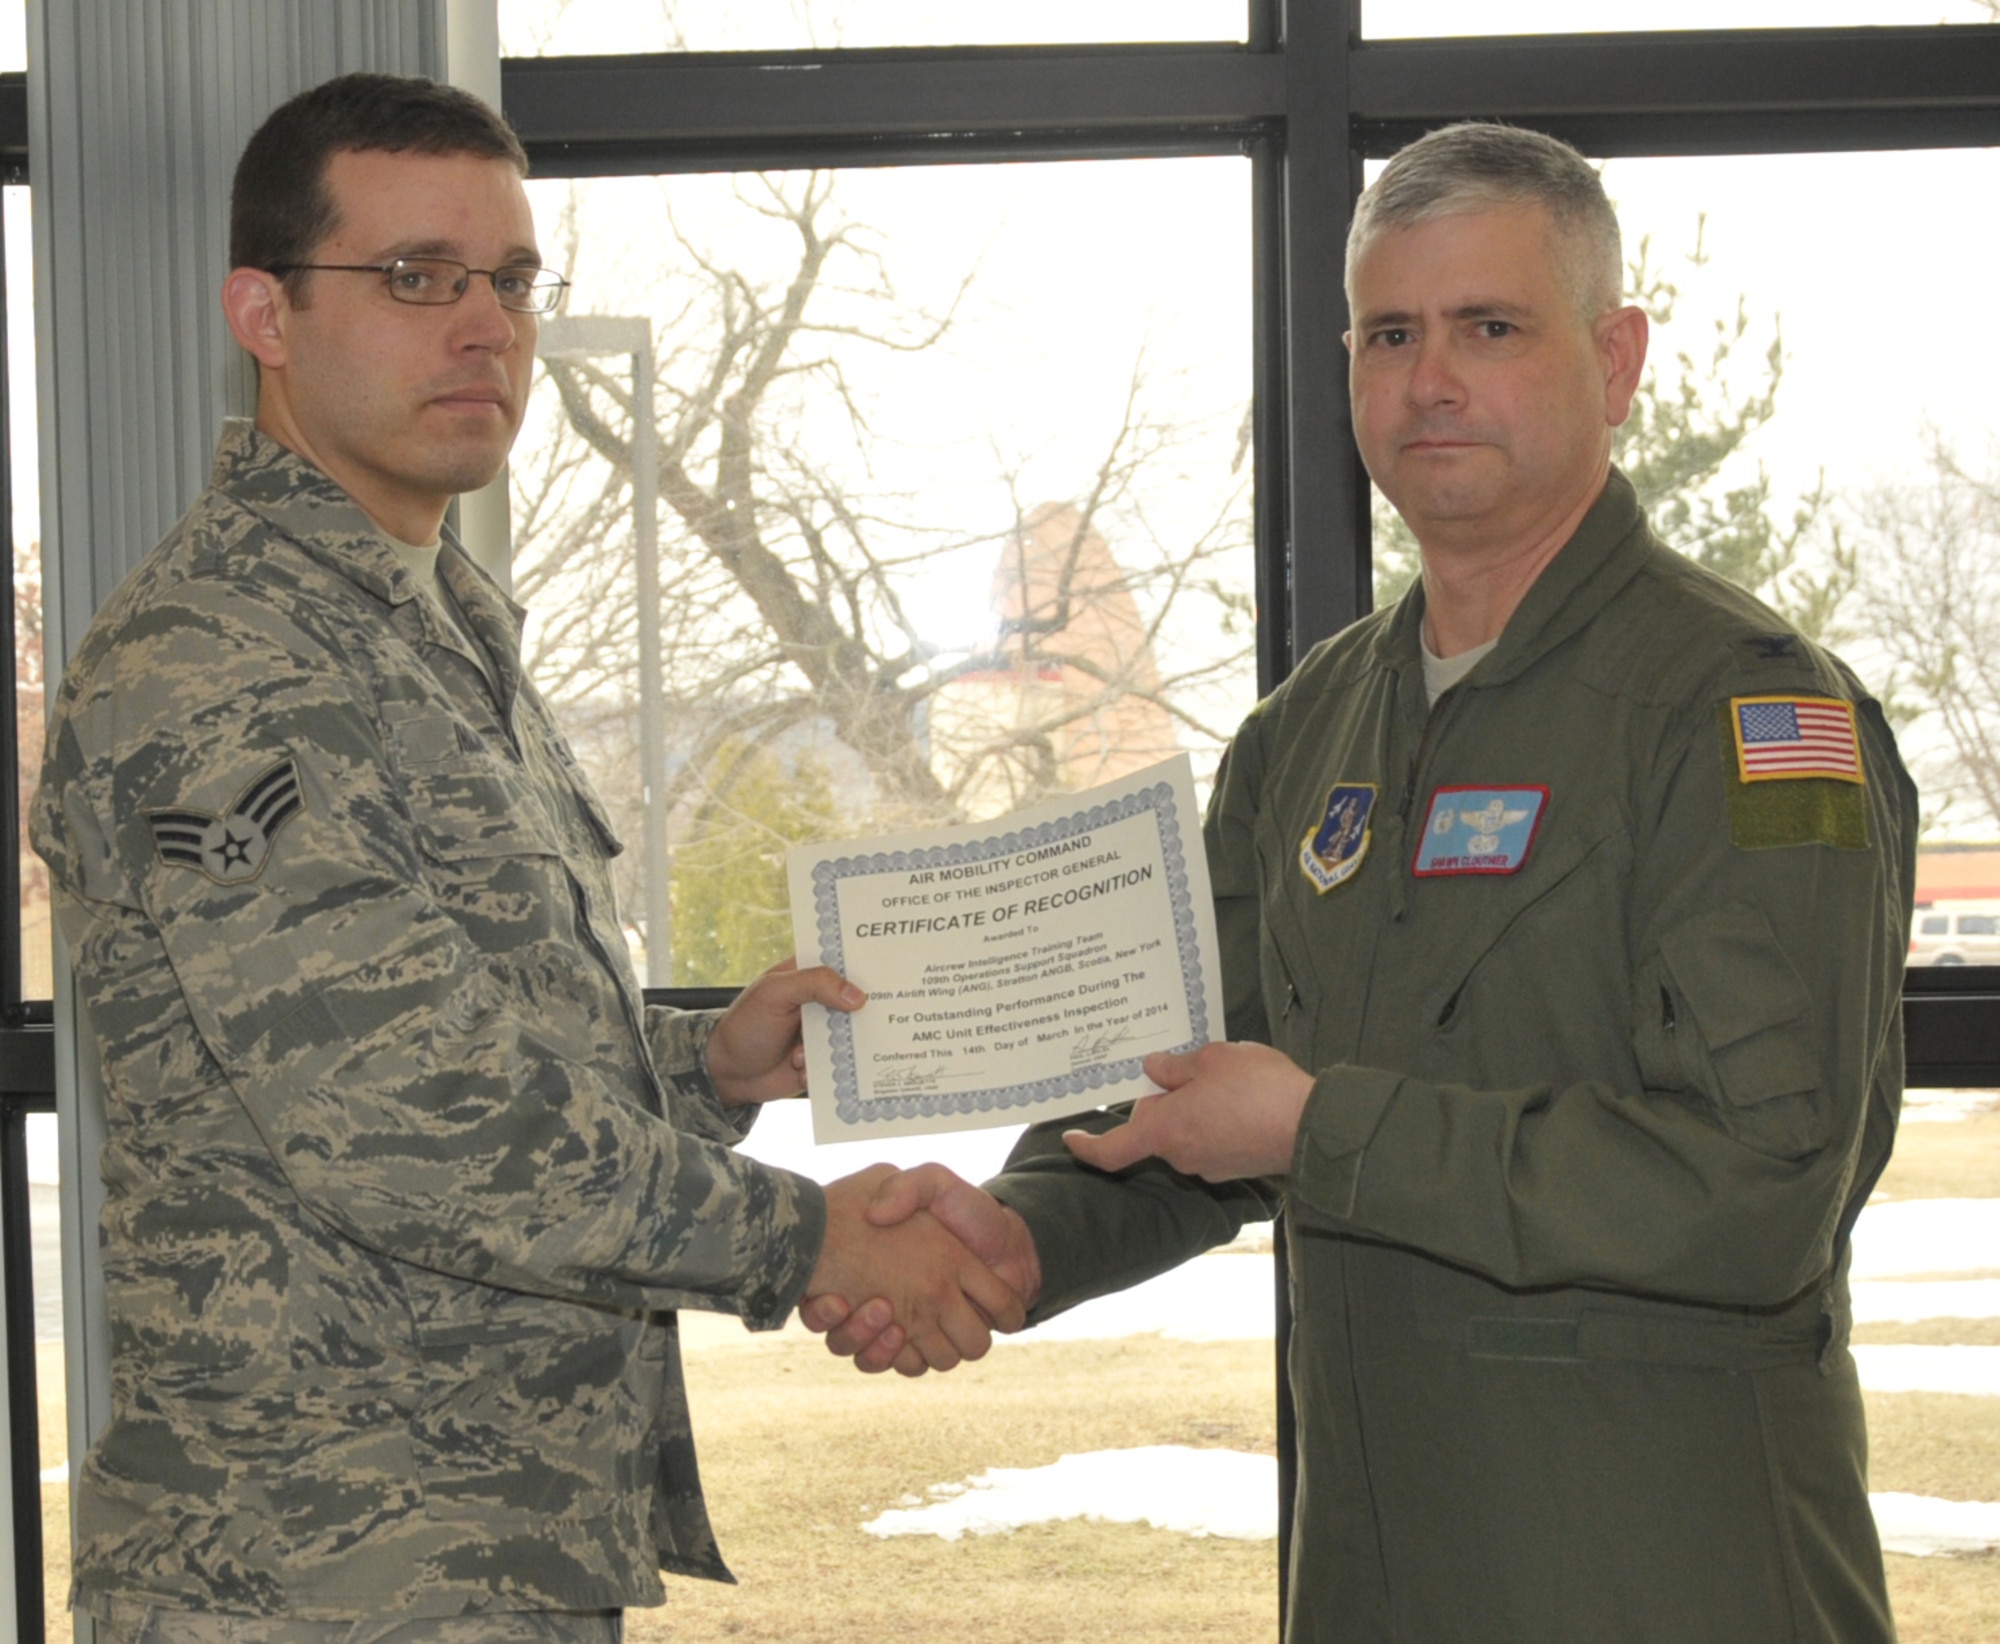 STRATTON AIR NATIONAL GUARD BASE, N.Y. -- Col. Shawn Clouthier (right), 109th Airlift Wing commander, presents Senior Airman Travis Inman with a certificate of recognition March 25, 2014, from Air Mobility Command for outstanding performance during the 109th AW's recent Unit Effectiveness Inspection. Inman and Staff Sgt. Joshua Hague (not pictured), 109th Operations Support Squadron, received team recognition as part of the Aircrew Intelligence Training Team. (Air National Guard photo by Master Sgt. William Gizara/Released)